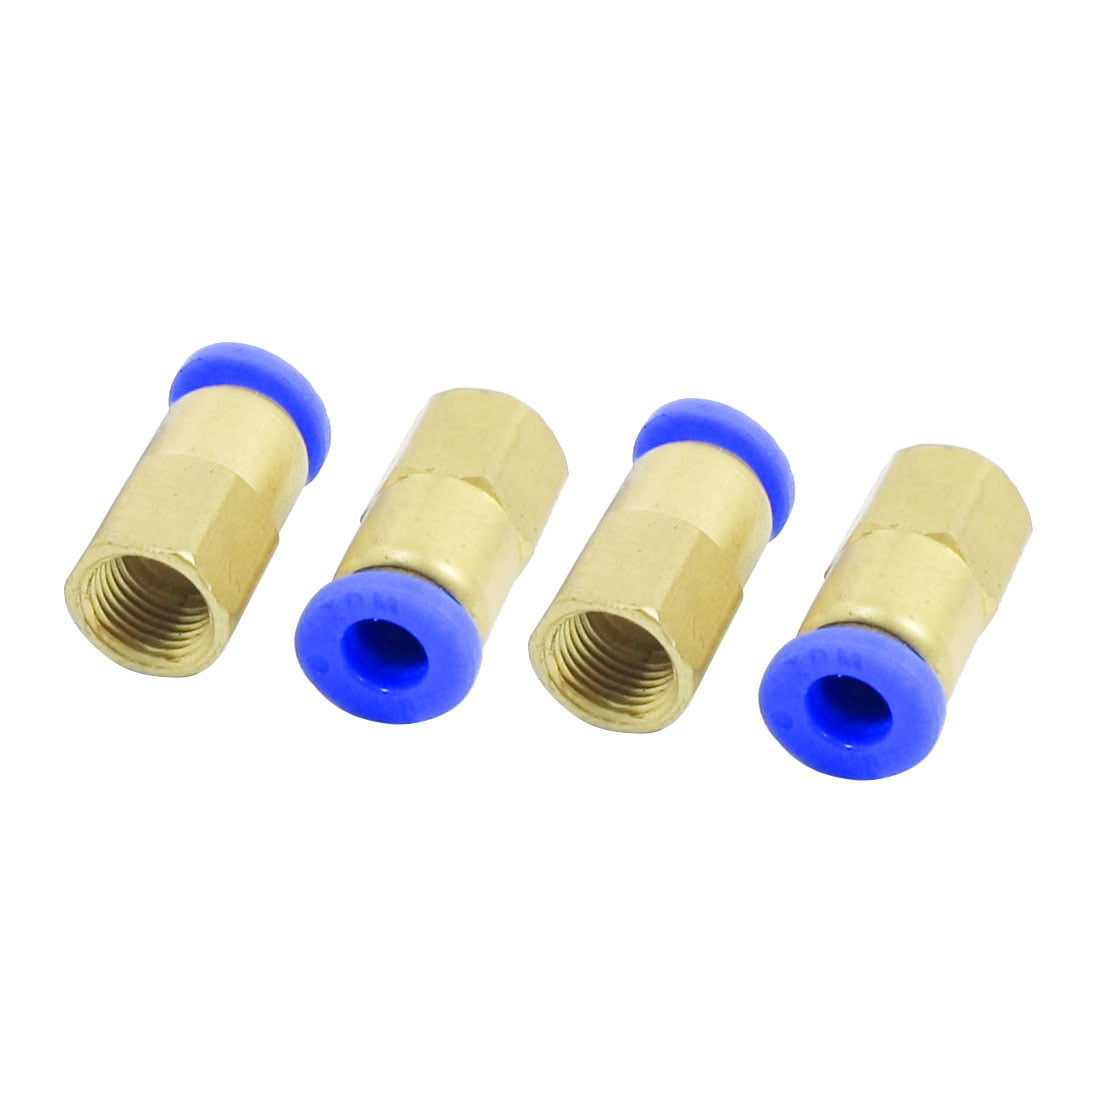 5Pc Pneumatic 1/2" Female Thread Stud to 6mm Hose Tube Push In Fitting Connector 